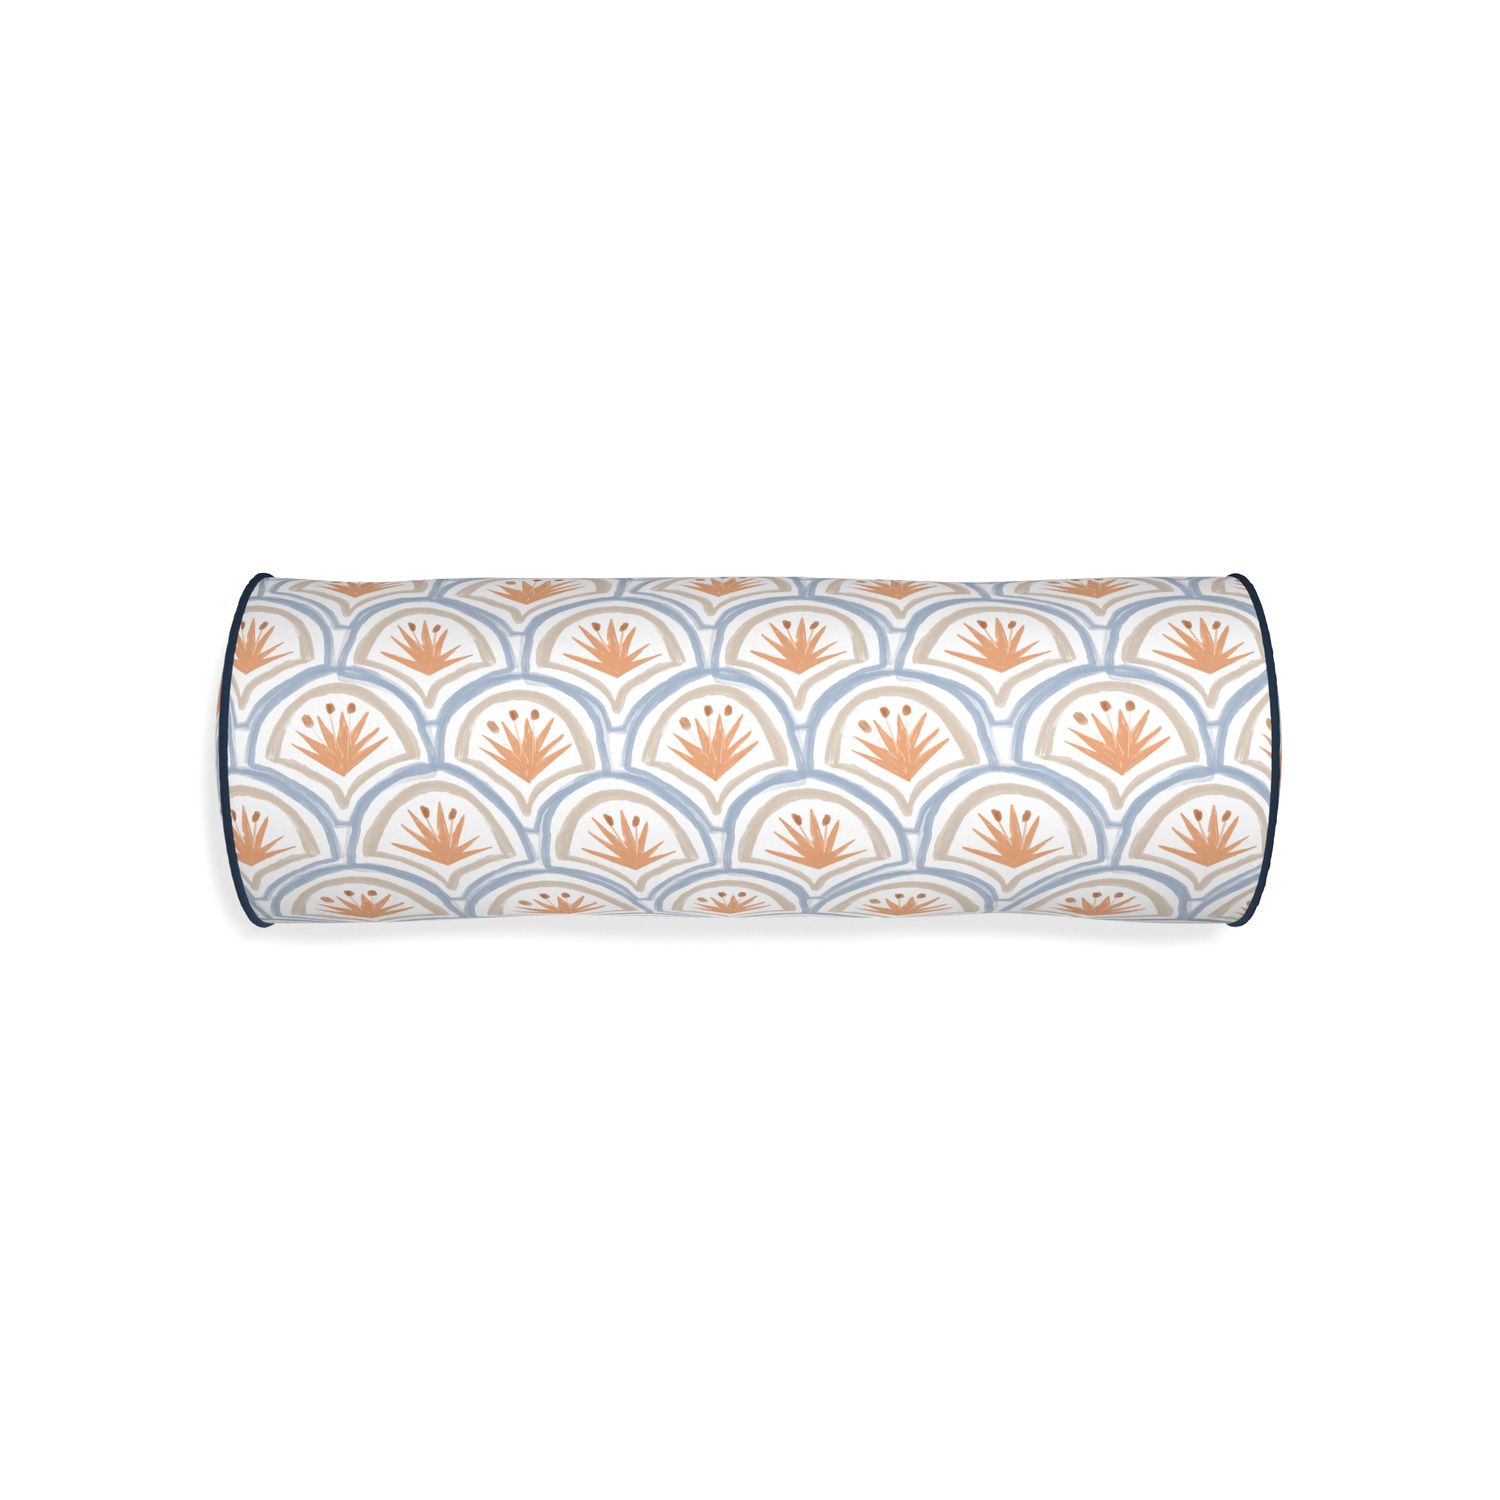 Bolster thatcher apricot custom art deco palm patternpillow with c piping on white background